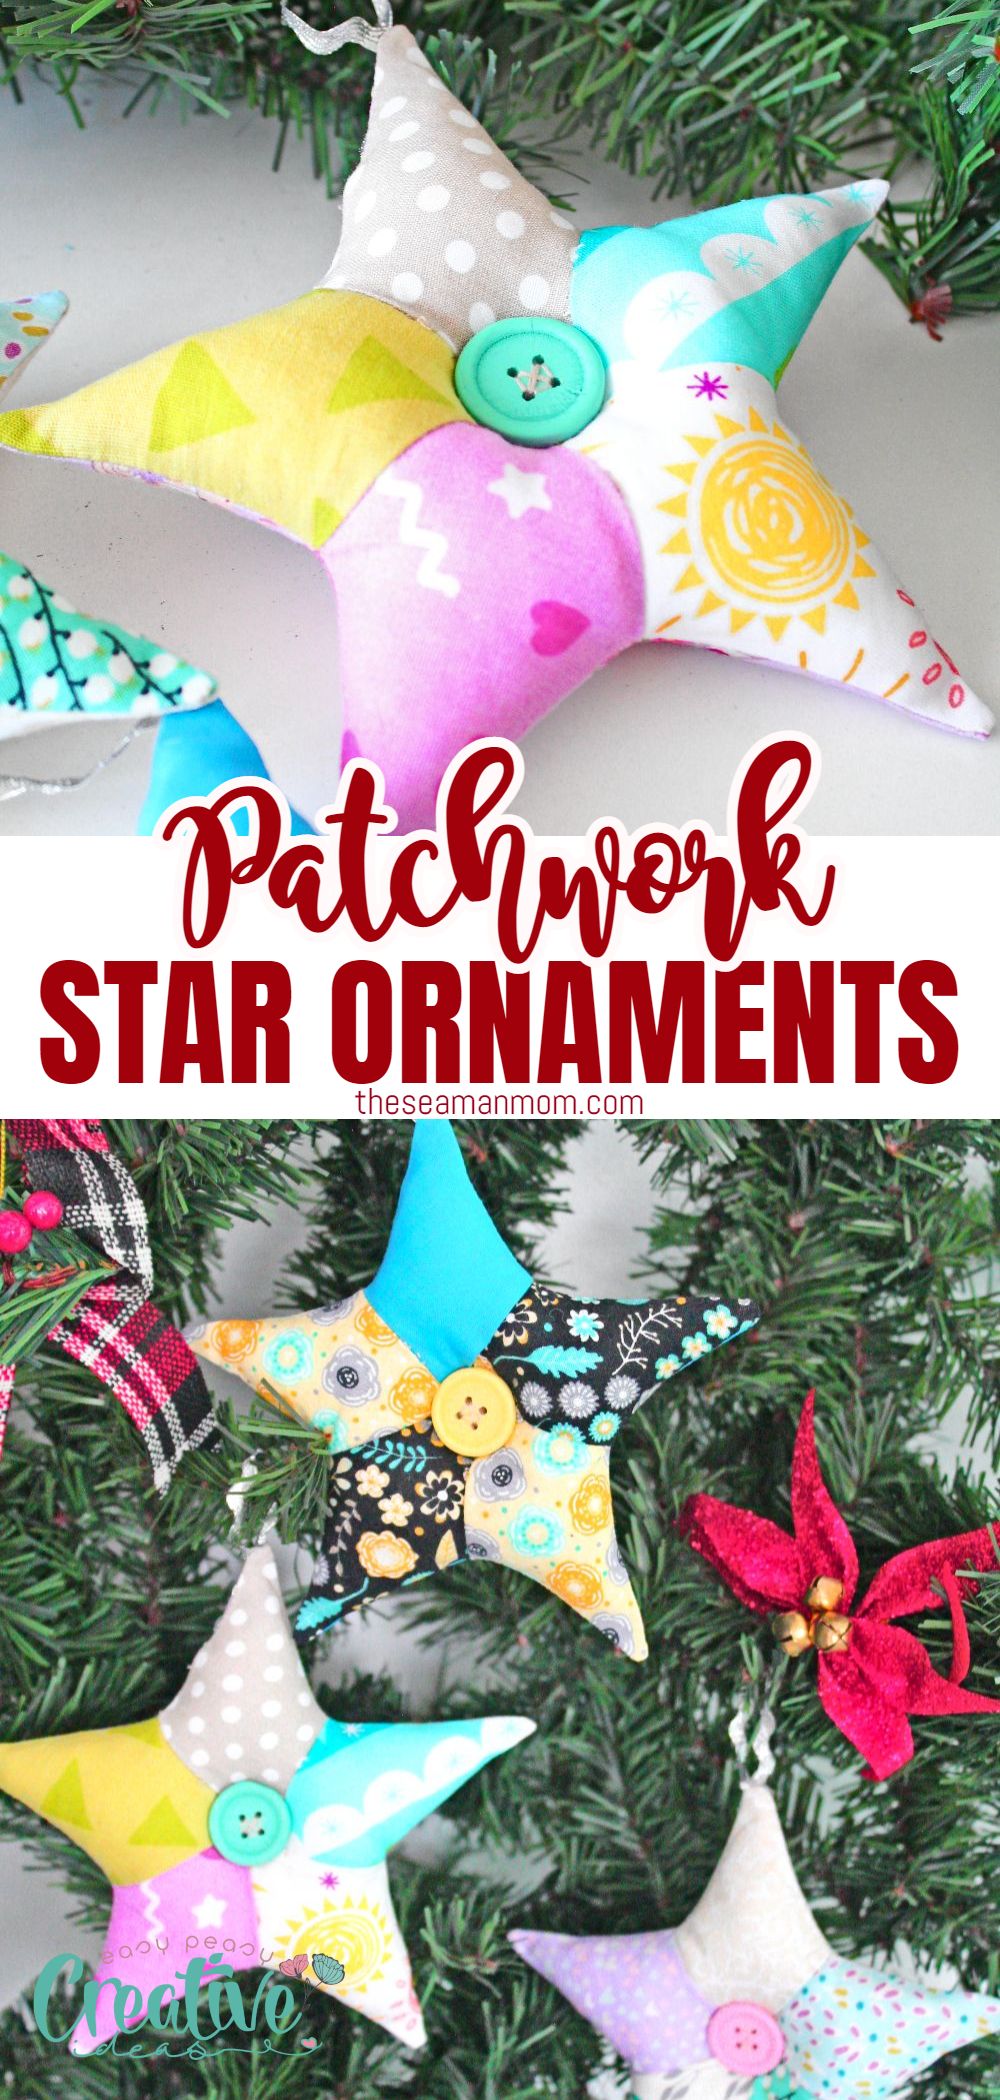 Looking for a fun and easy way to decorate your Christmas tree this year? Try making some patchwork star ornaments using simple sewing and quilting techniques. With my step-by-step tutorial and Christmas star templates, it's easy to create beautiful stars in a variety of colors. Whether you prefer traditional red and green or bolder patterns and prints, these star ornaments are sure to add a festive touch to your holiday décor. So what are you waiting for? Get started today! via @petroneagu